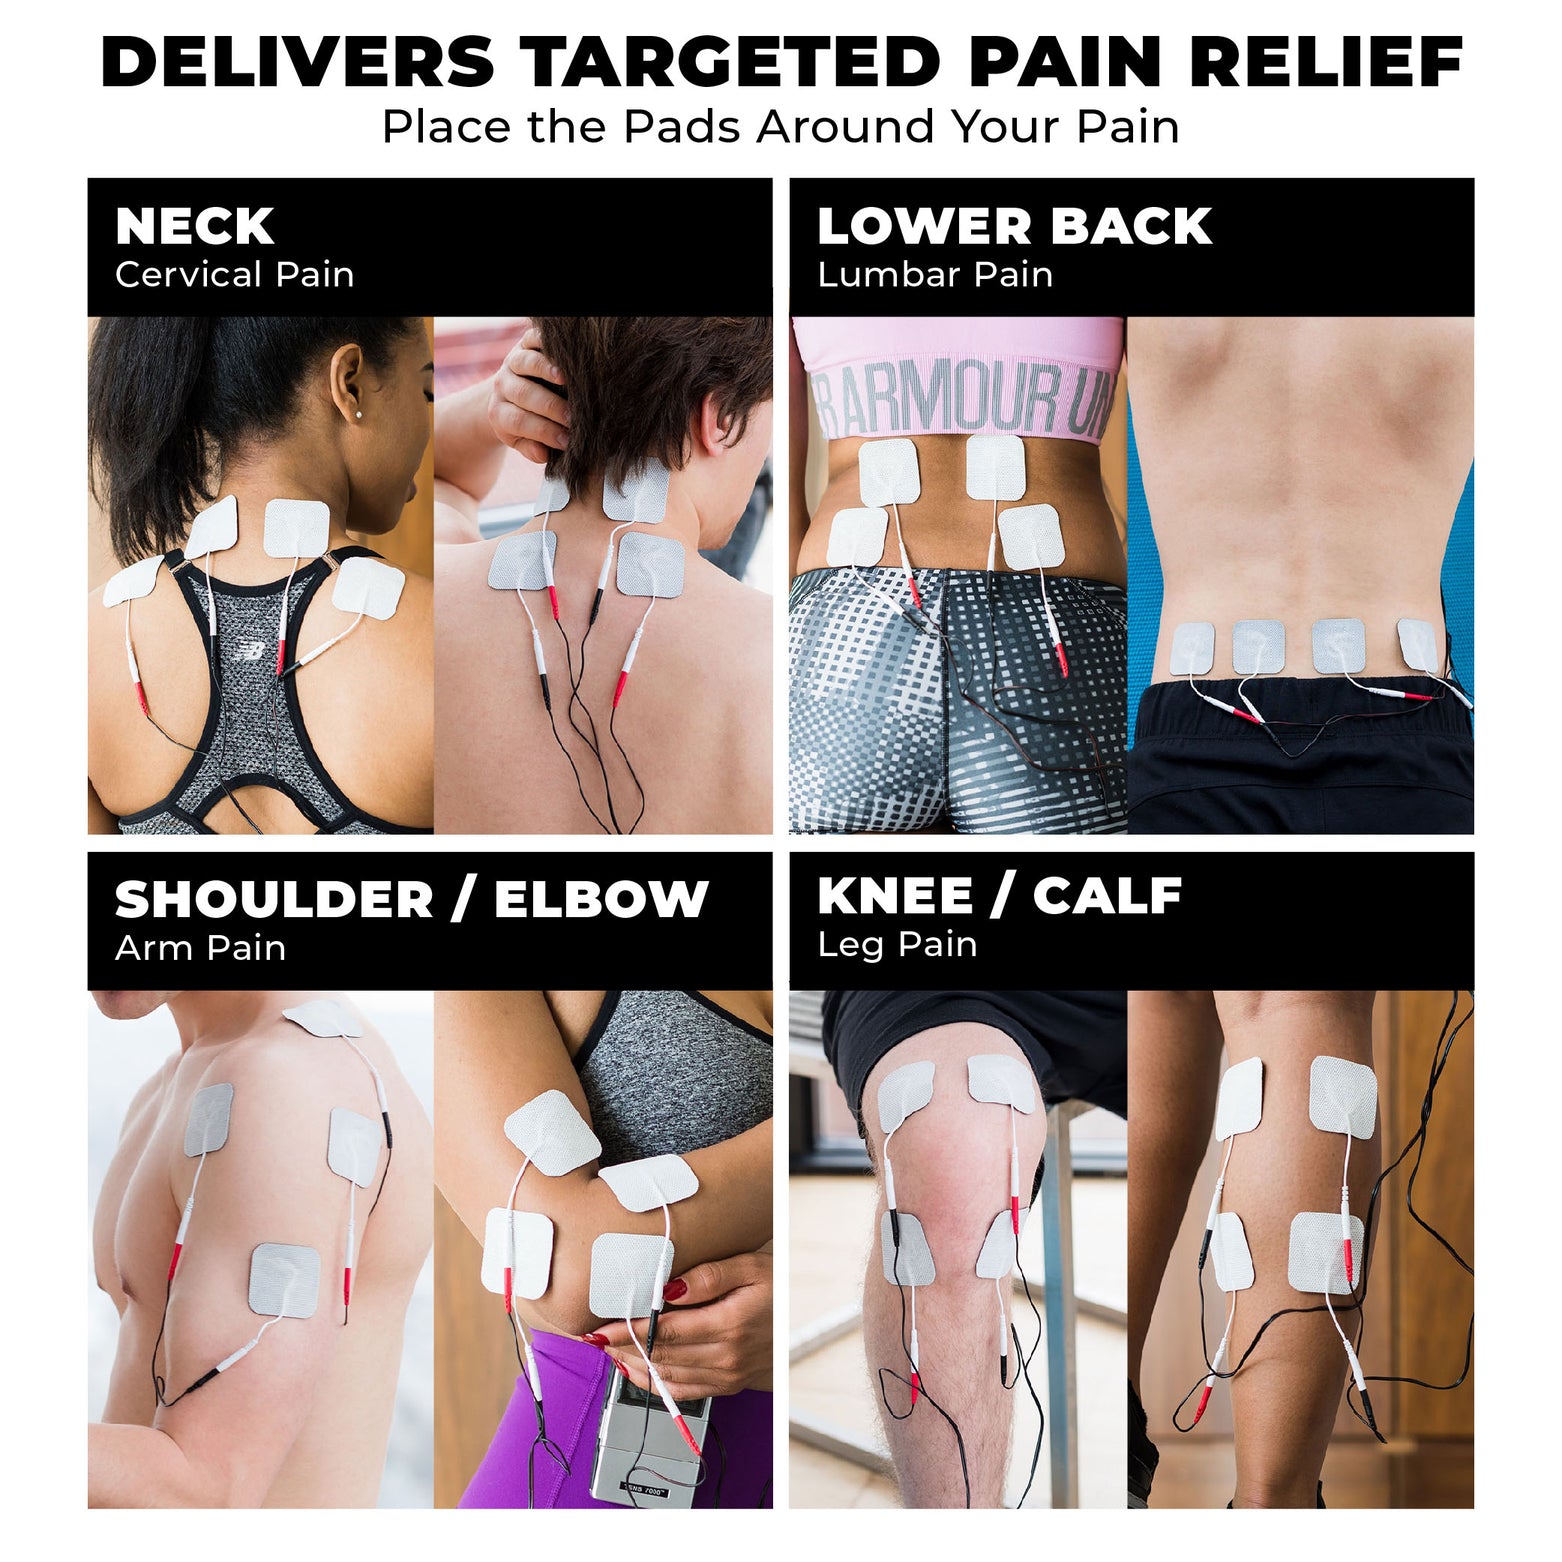 TENS Therapy for Neck Pain – TENS 7000